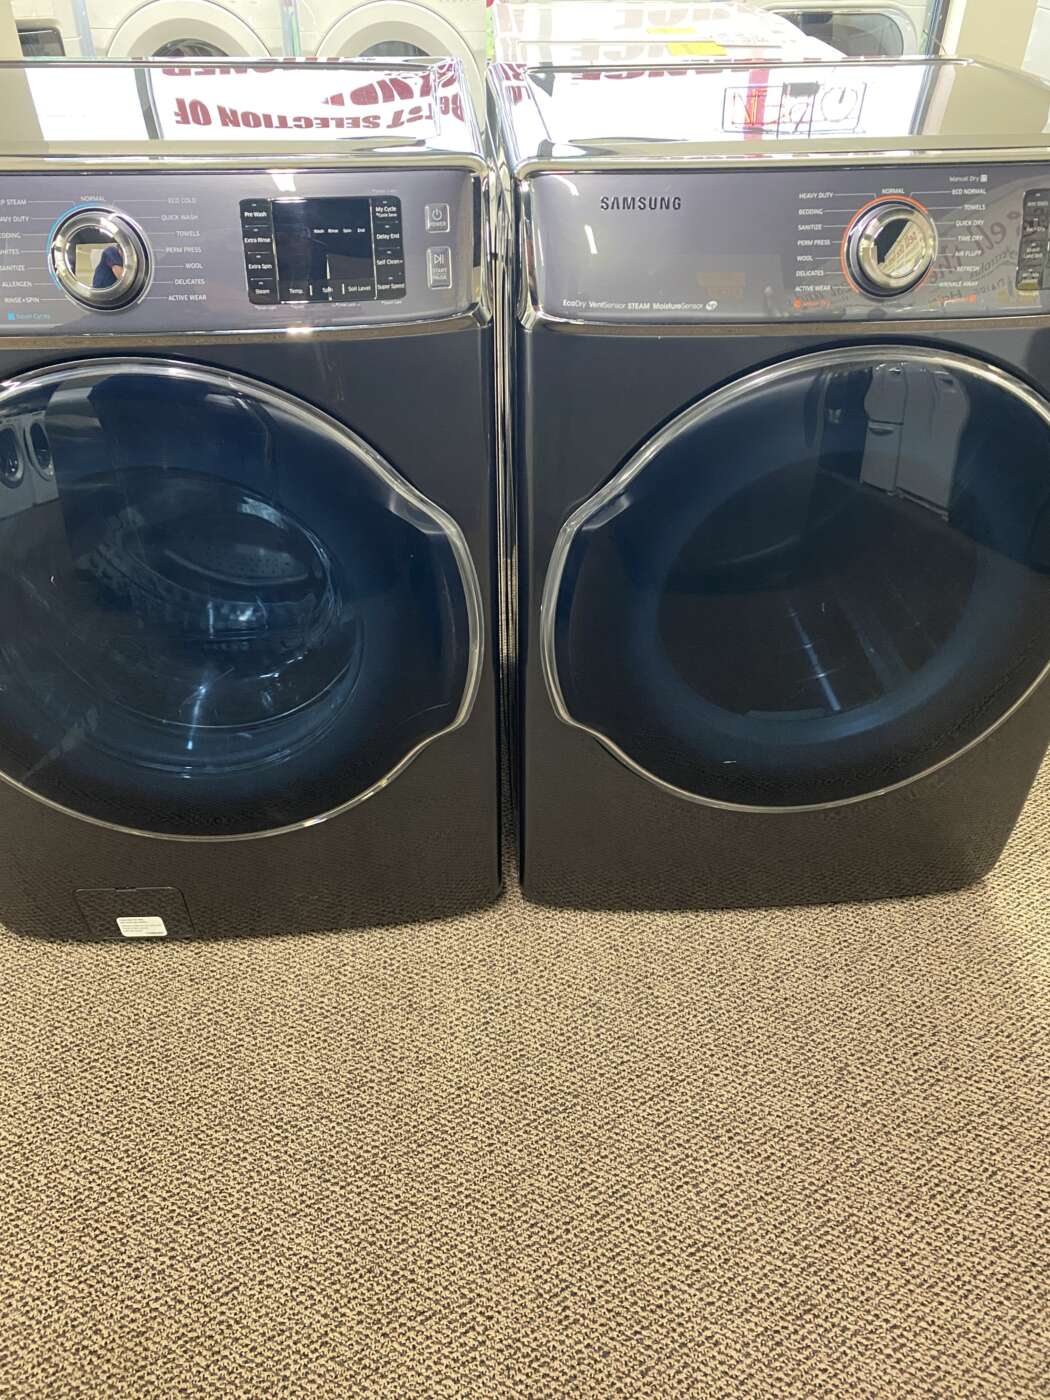 Reconditioned SAMSUNG 5.6 Cu. Ft. Front-Load Washer and 9.5 Cu. Ft. electric Dryer (Onyx in Color)